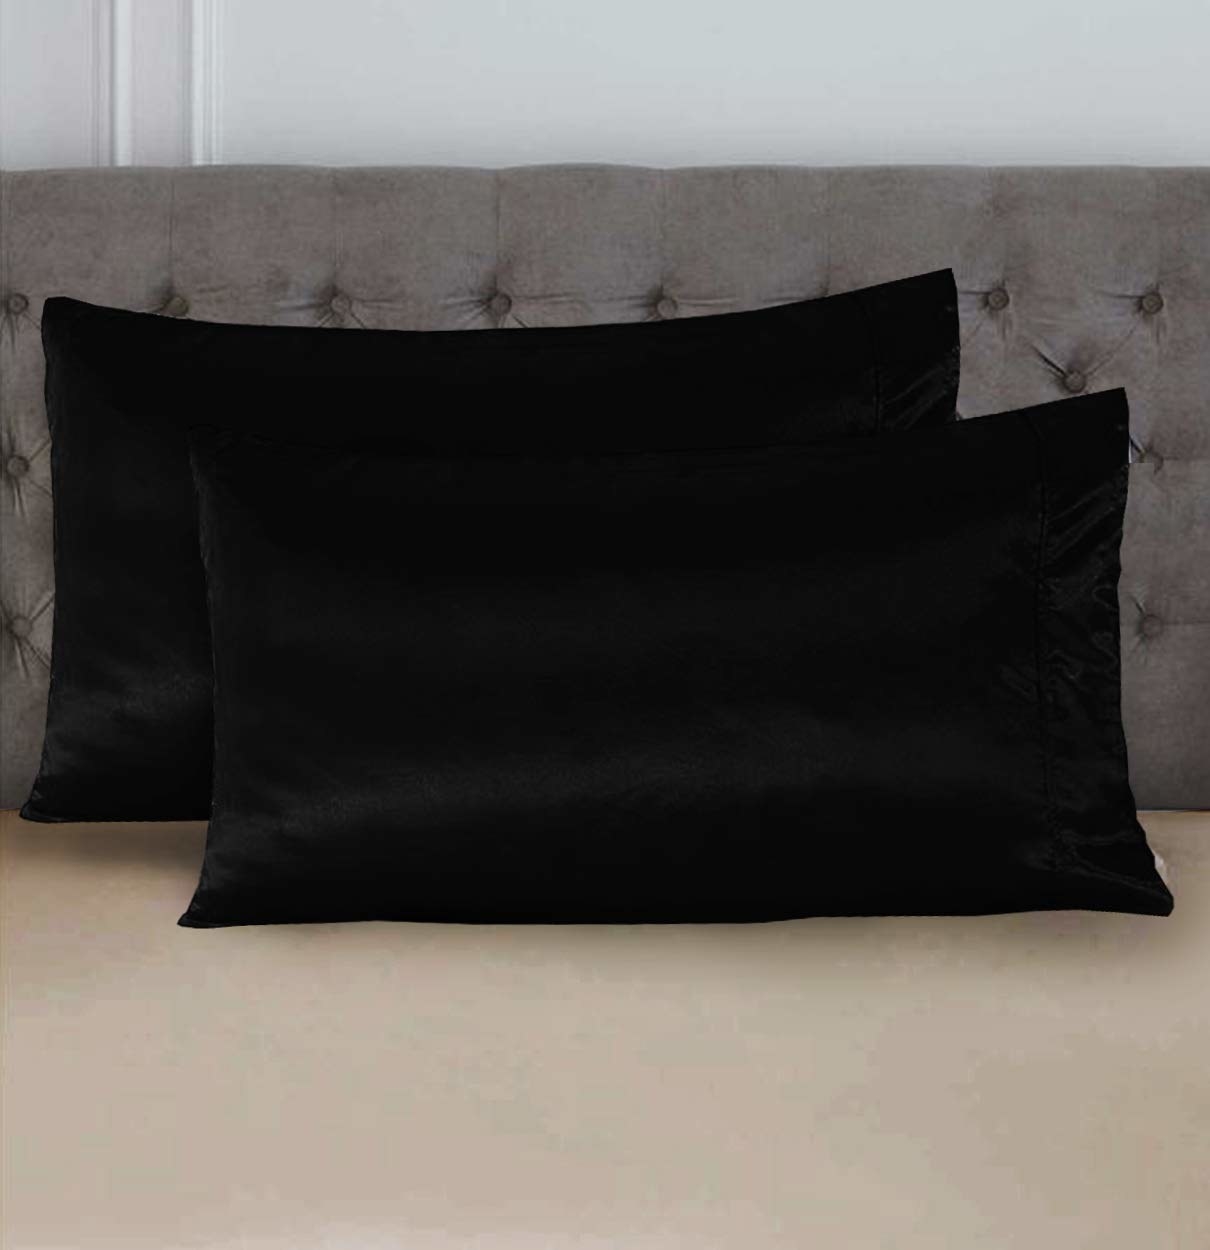 Two full-black satin pillow covers on a bed. 